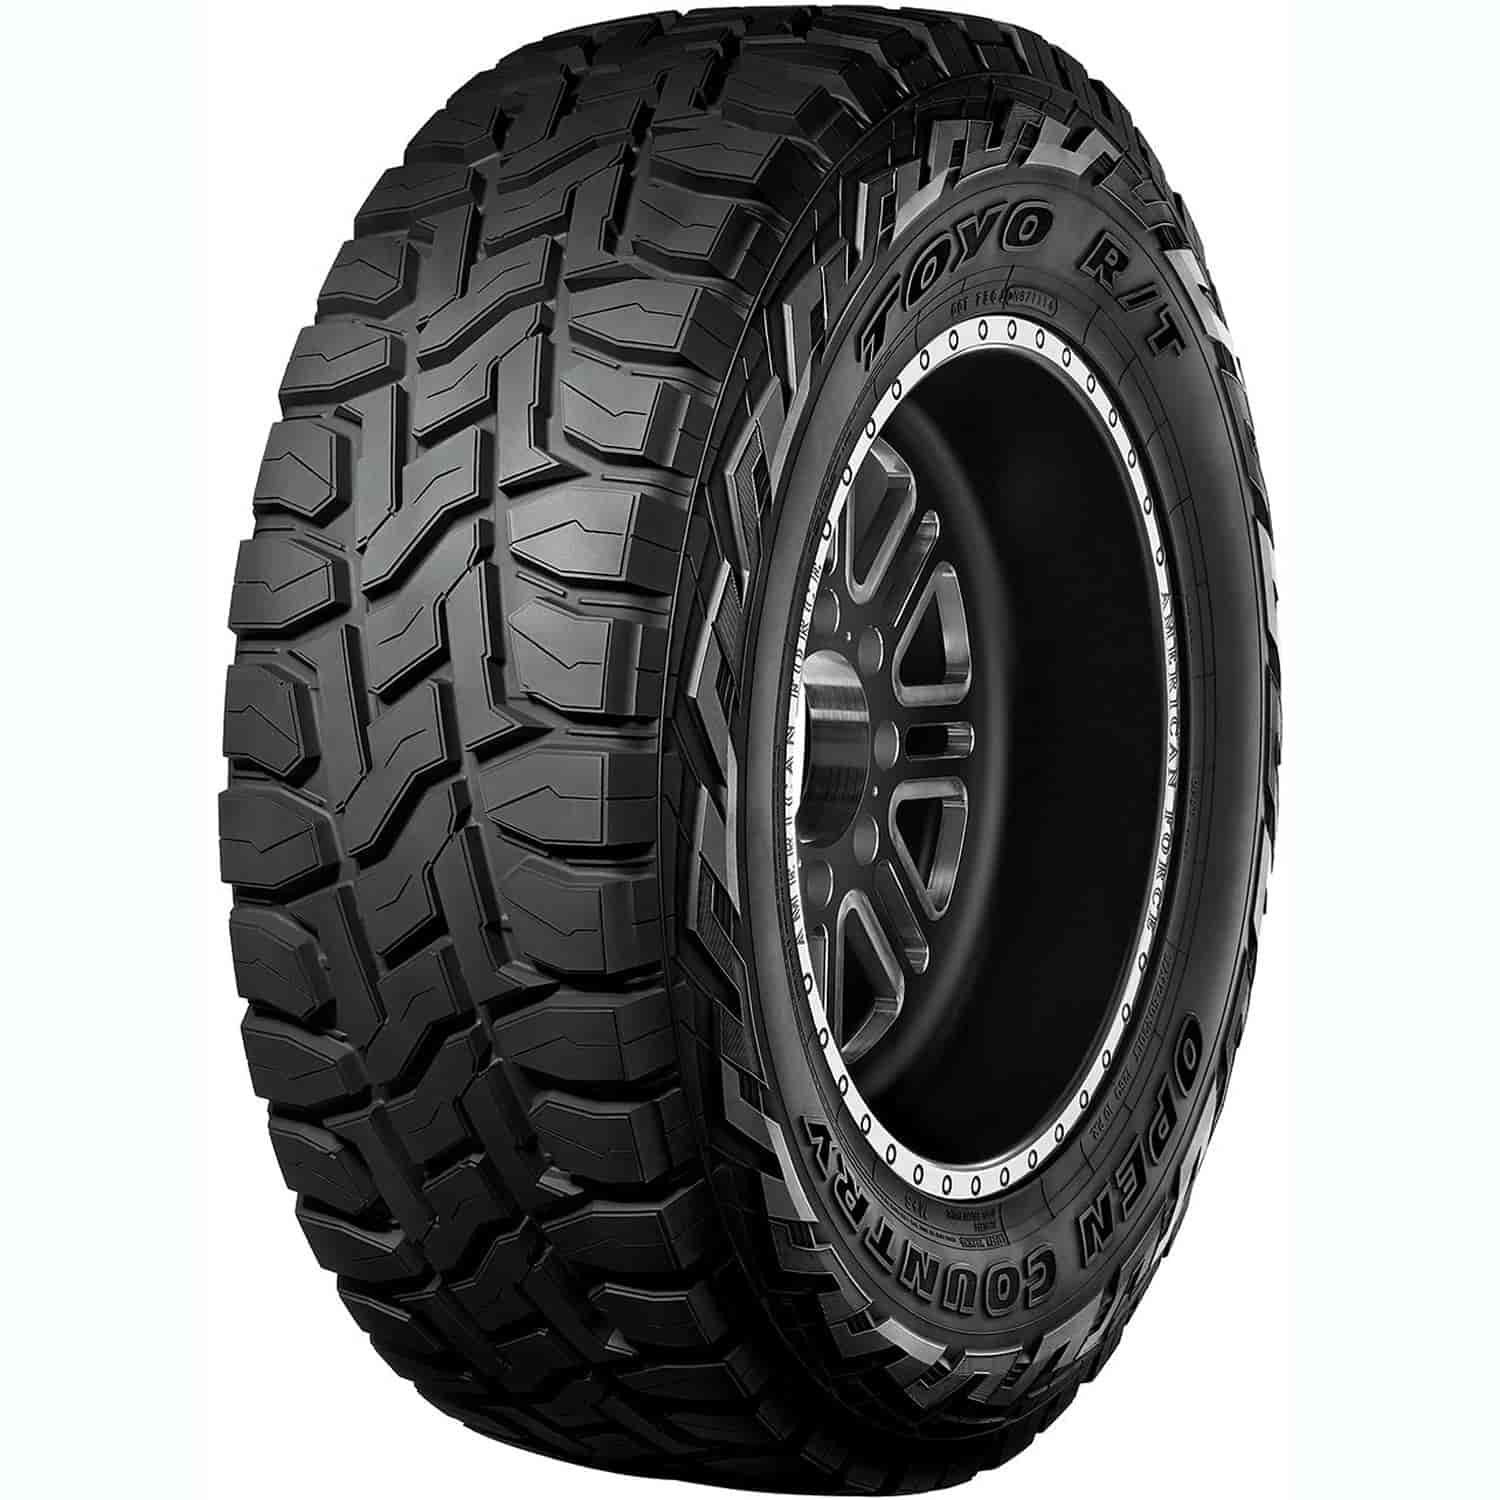 OPEN COUNTRY R/T 33X1250R18 118Q